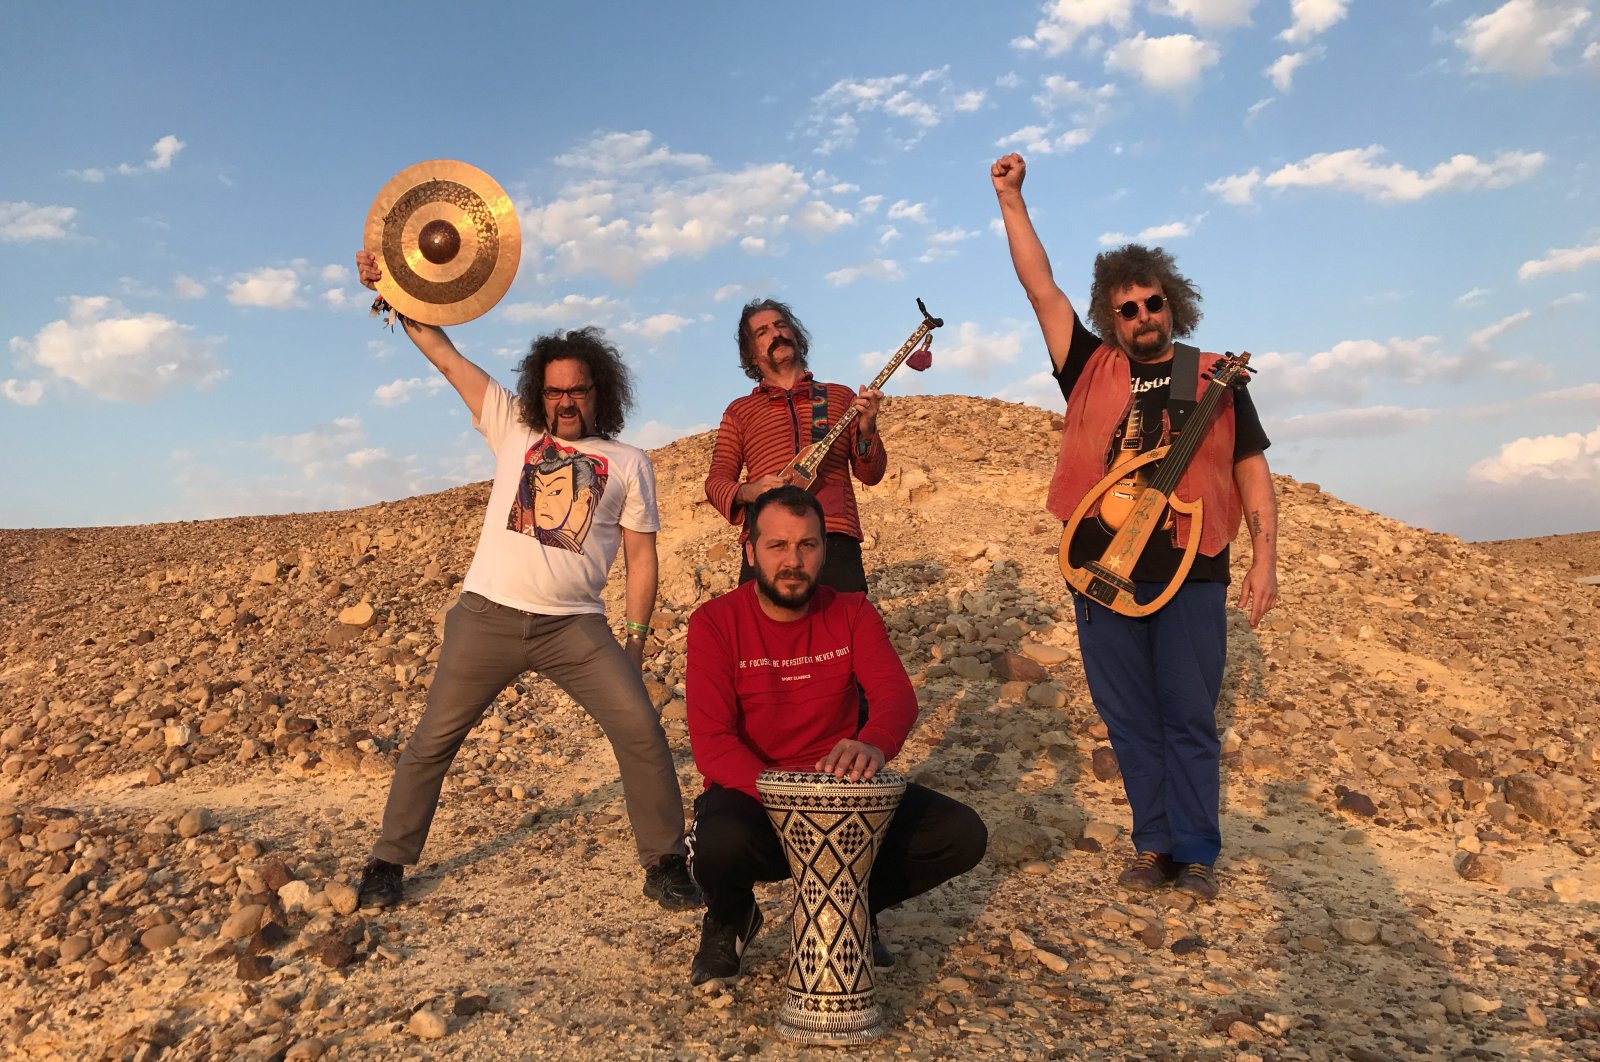 BaBa Zula will perform their music combining oriental instruments with electronic sounds at the London Jazz Festival's Istanbul Psychedelic concert. (Courtesy of Istanbul Foundation for Culture and Arts)